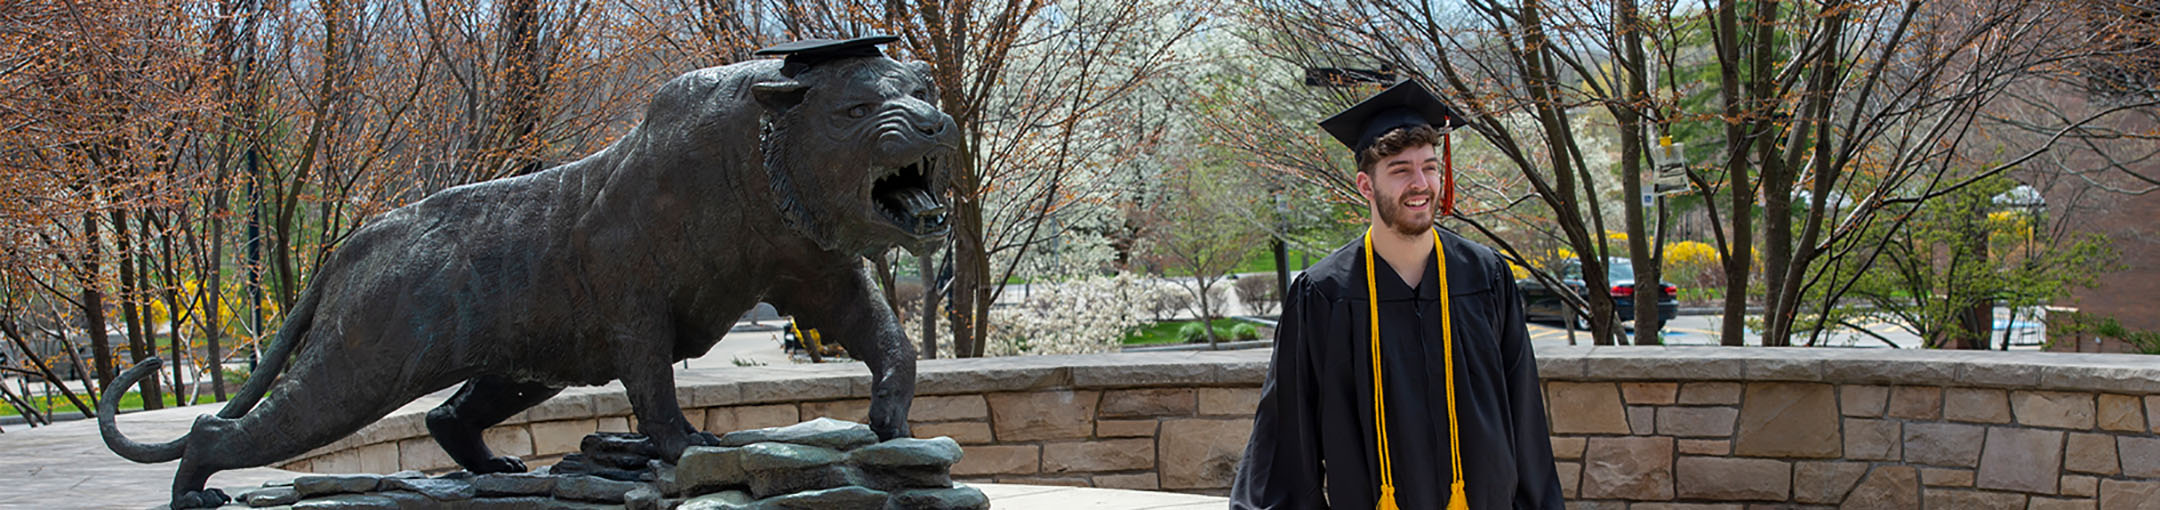 a student wearing a cap and gown stands next to the Tiger statue in front of a brick wall